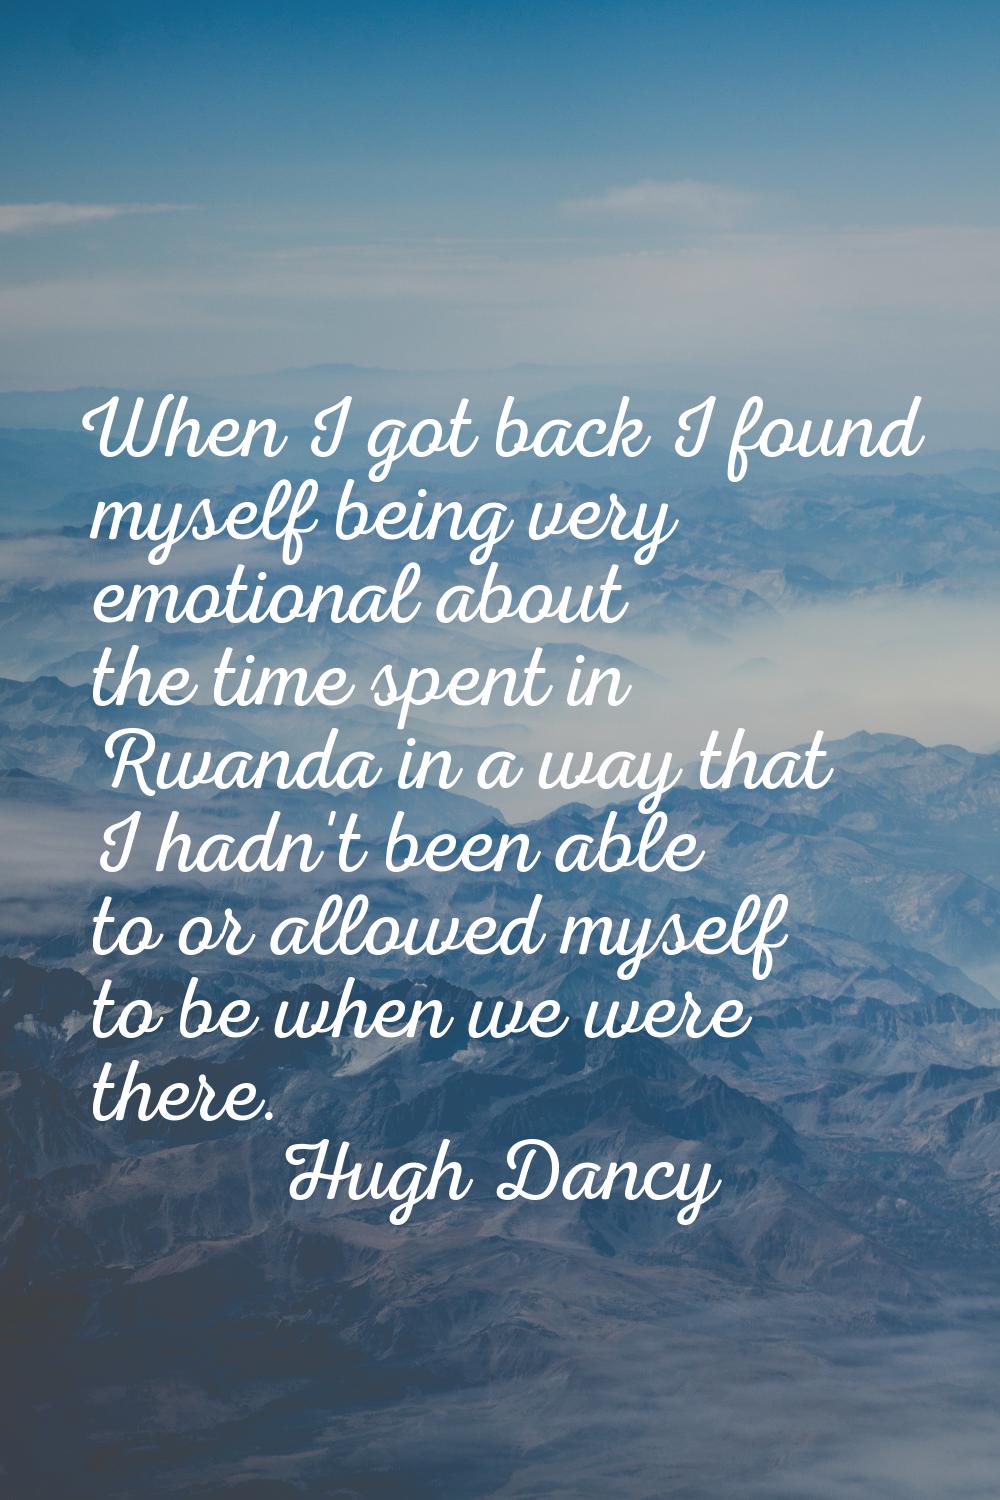 When I got back I found myself being very emotional about the time spent in Rwanda in a way that I 